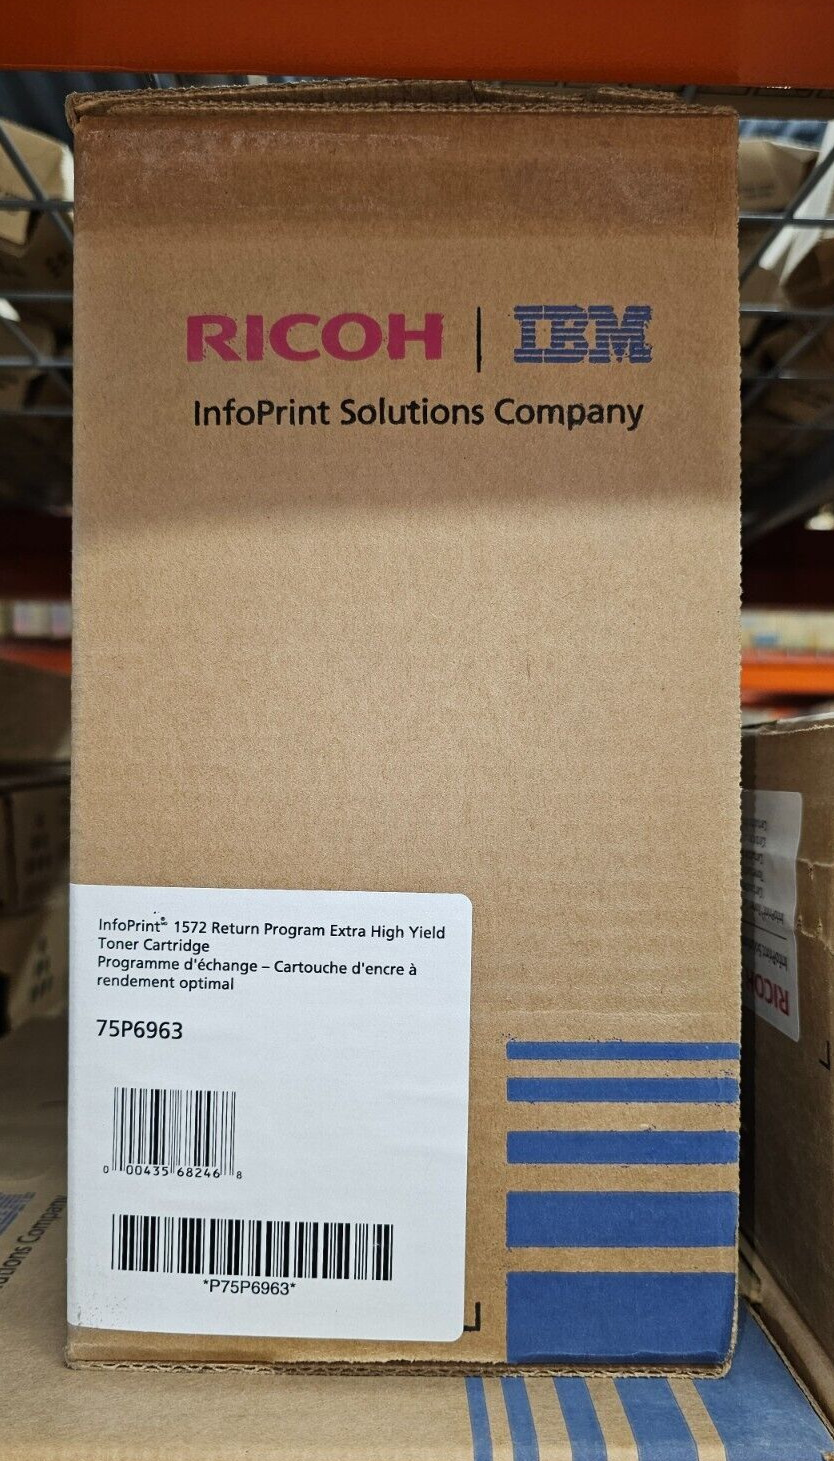 New Genuine Sealed Box Ricoh 75P6963 Extra High Yield toner for InfoPrint 1572